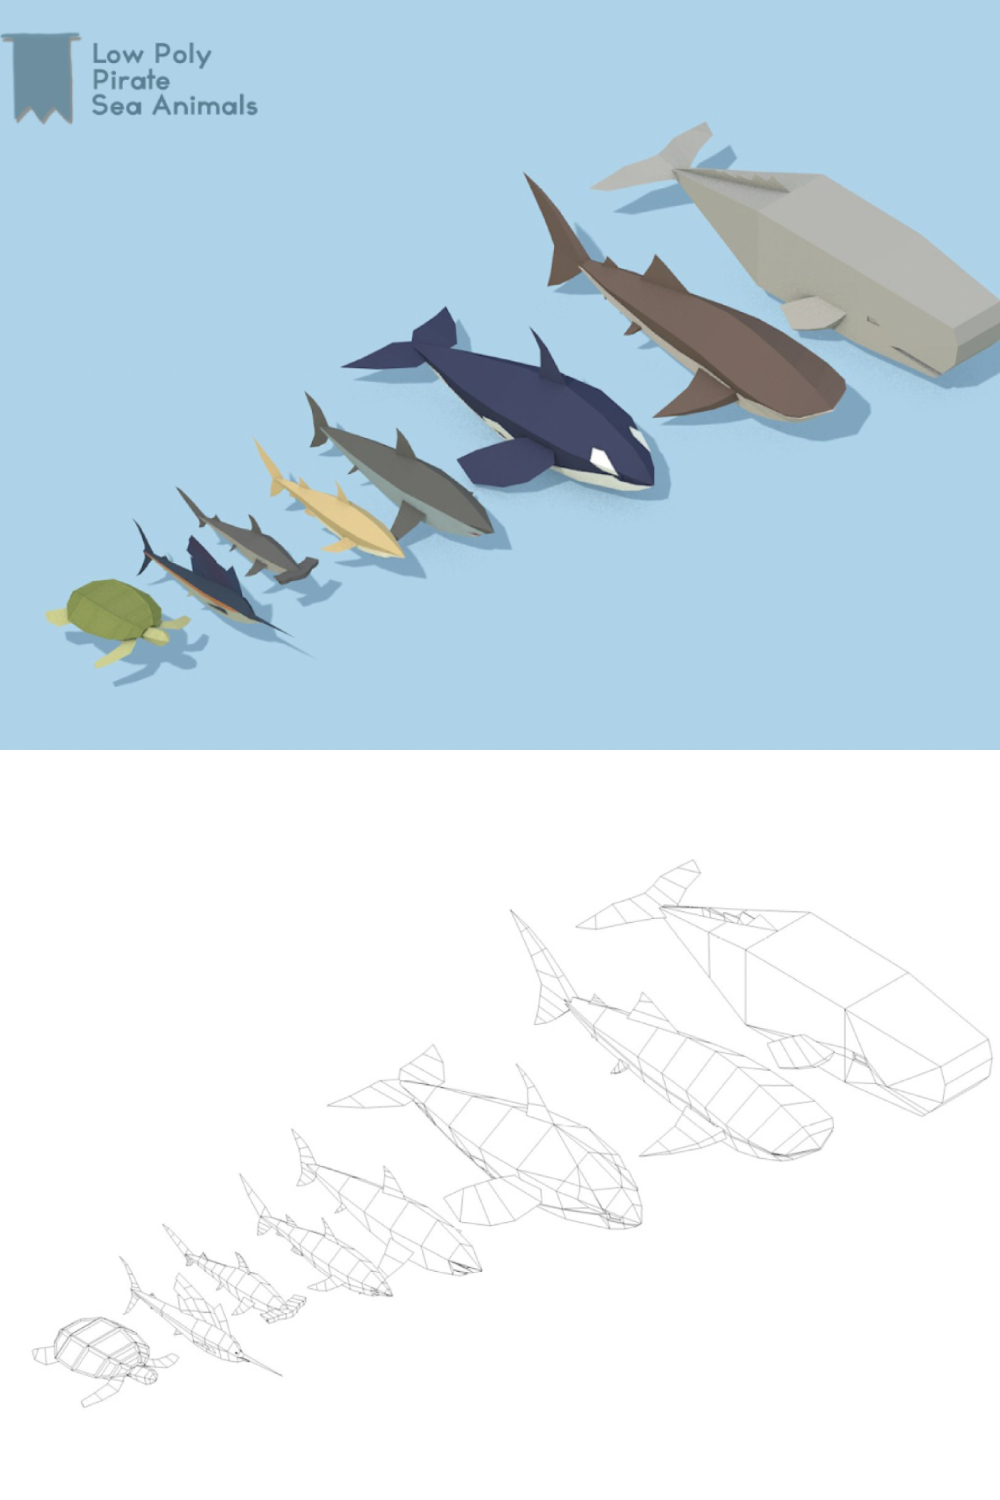 Low Poly Pirate Sea Animals - Pinterest.